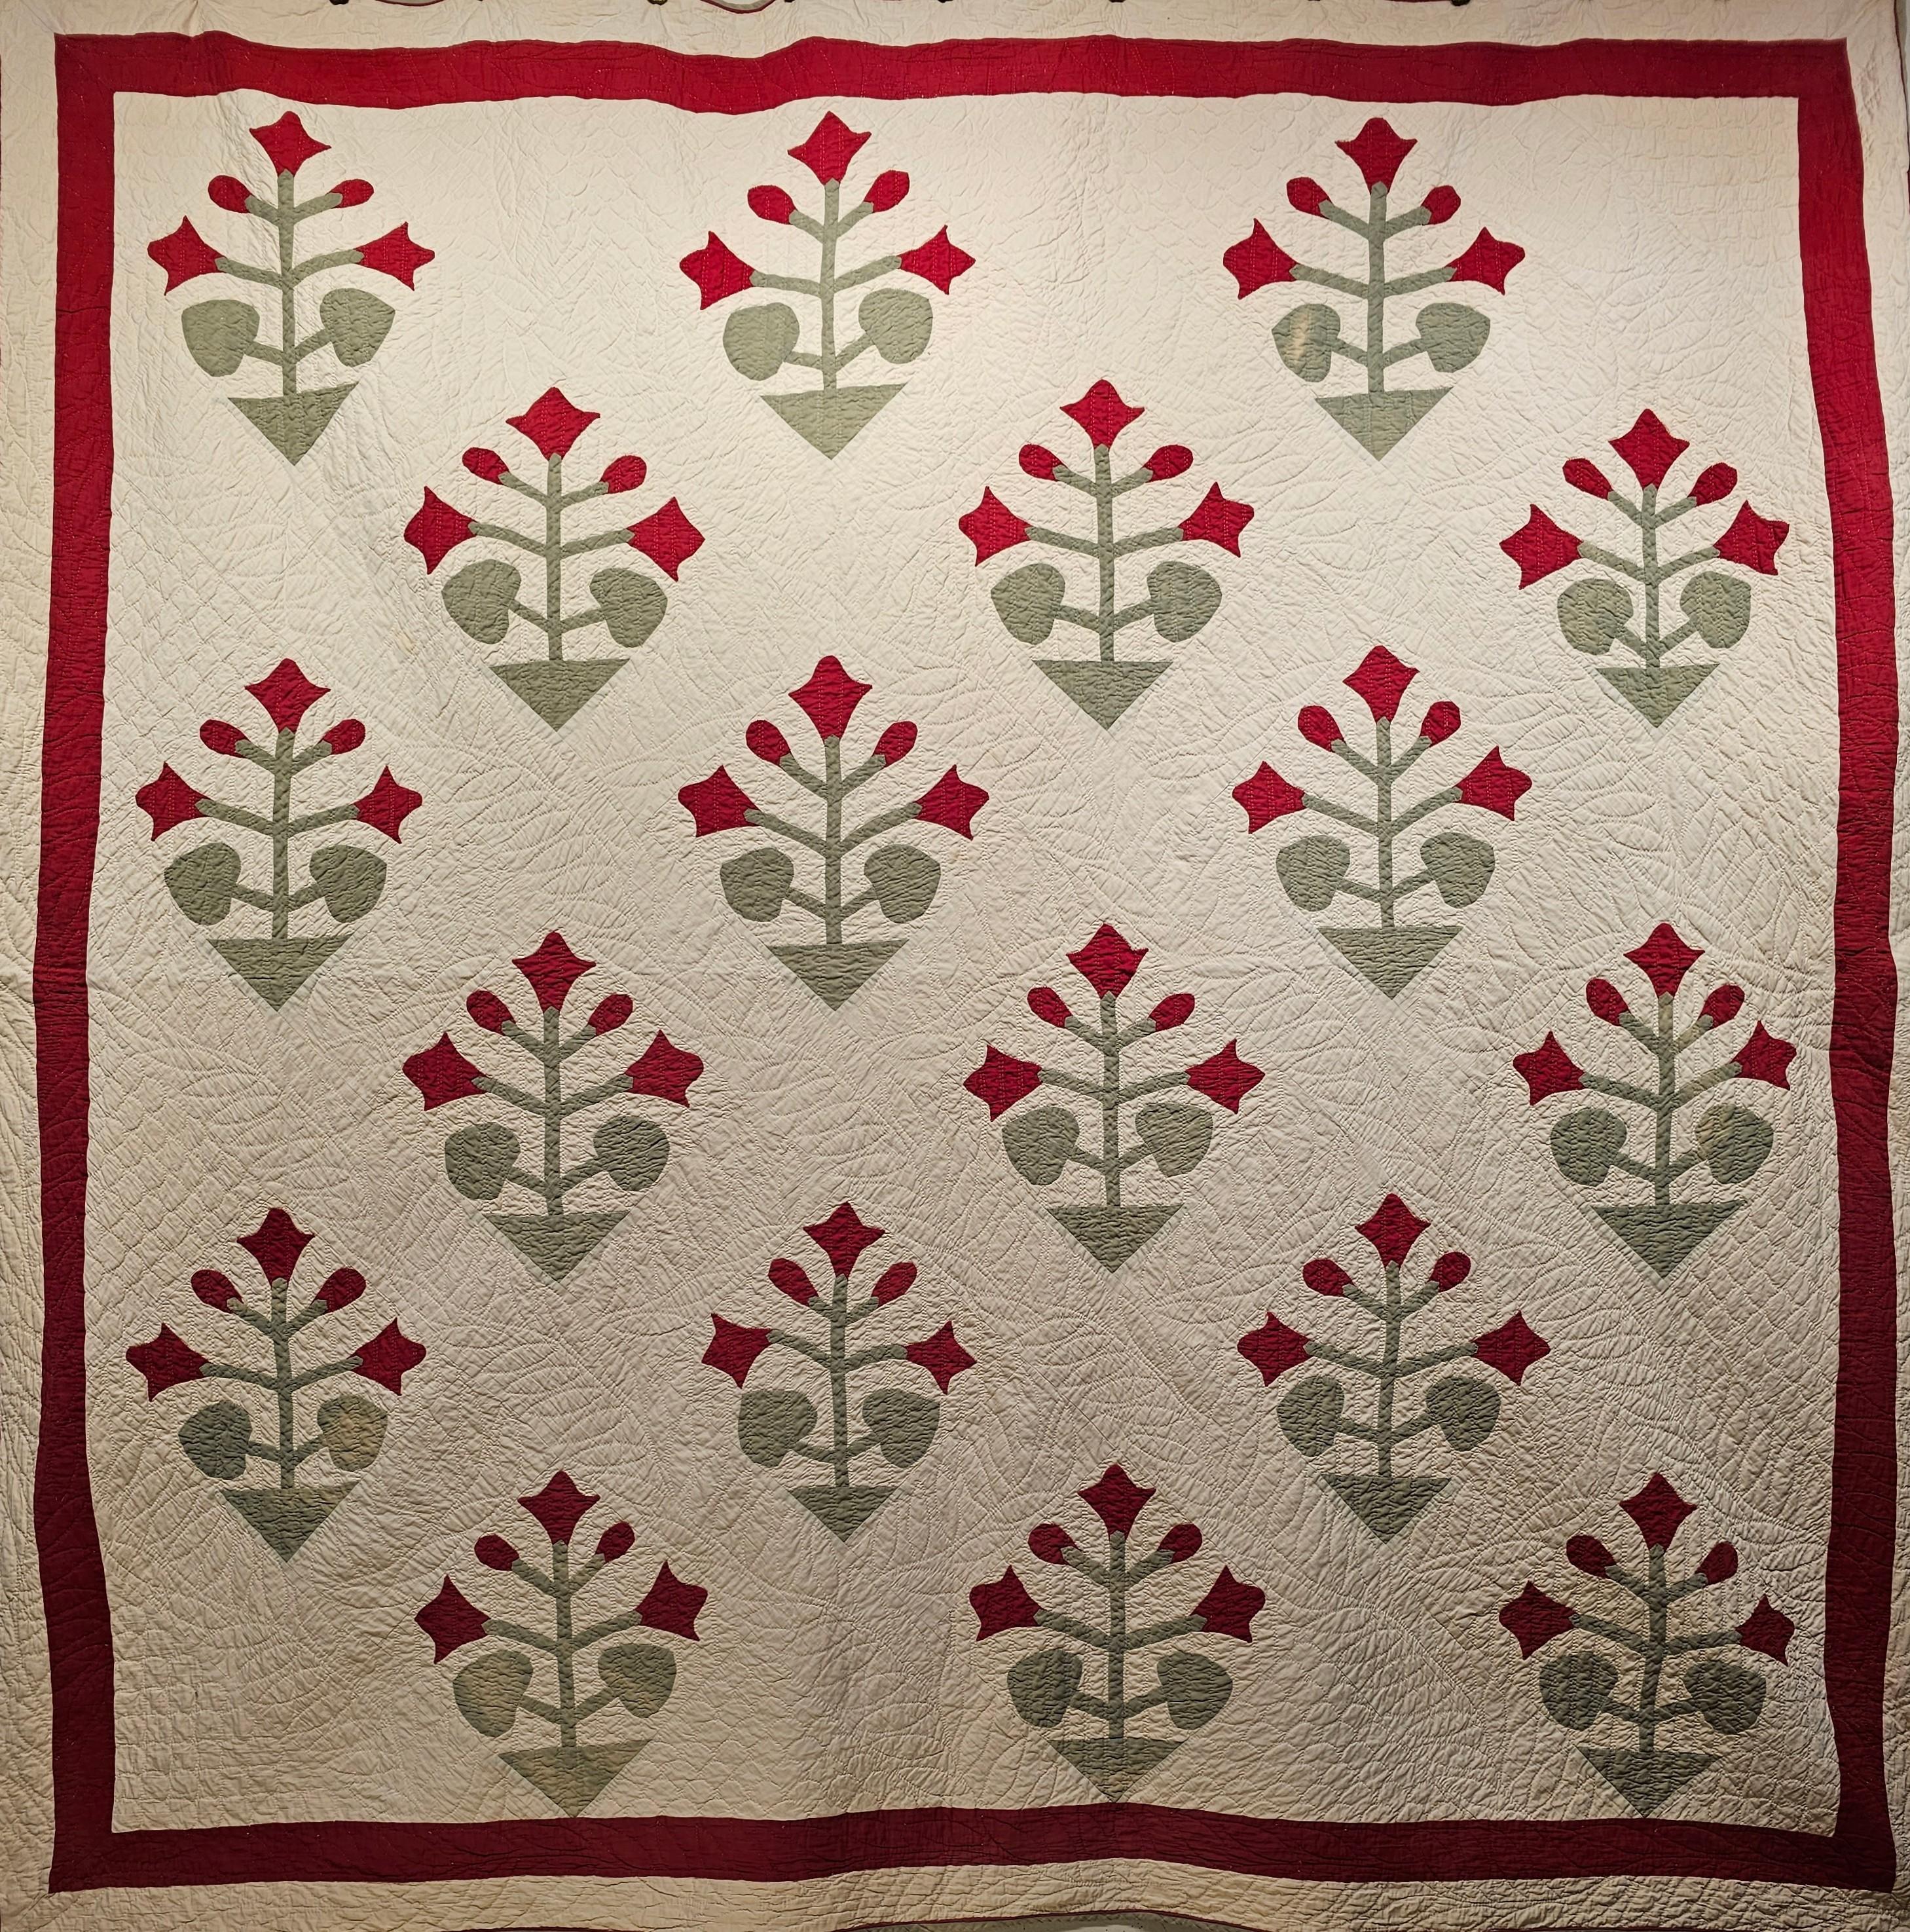 19th Century American Applique Quilt in Floral Pattern in Ivory, Red, and Green